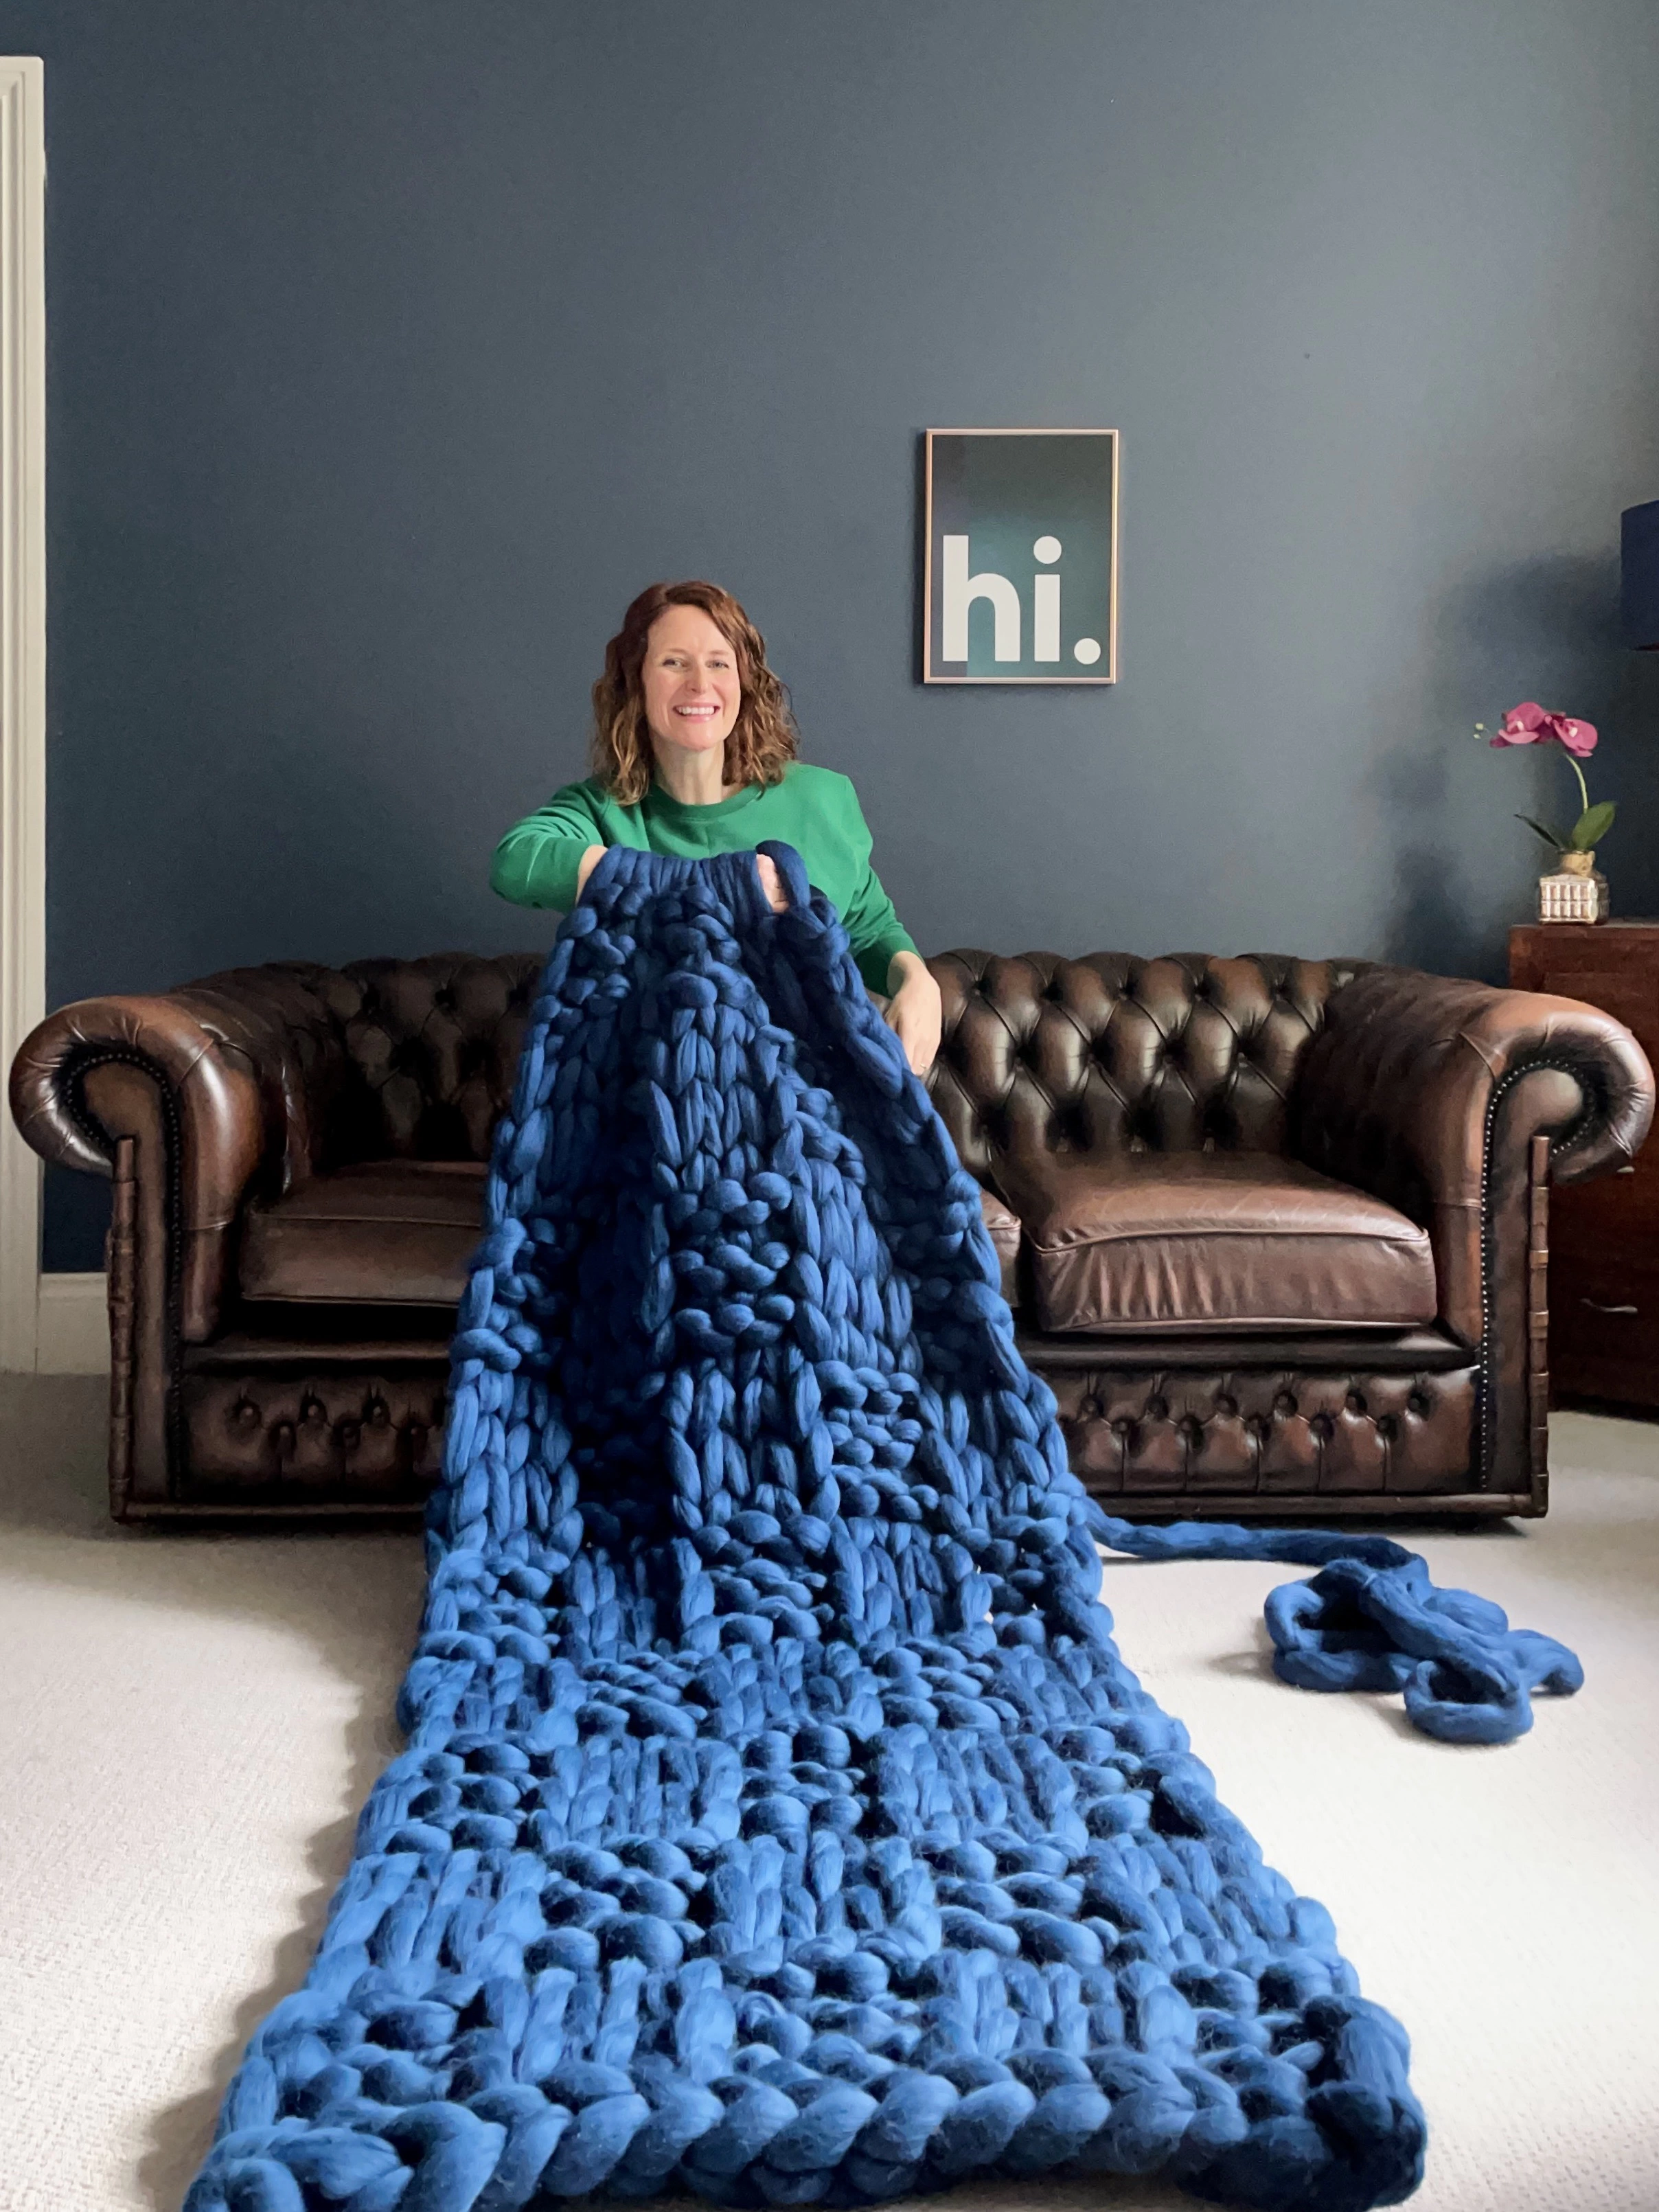 Mizz, a white woman wearing a bright green jumper, sits on a brown leather sofa in front of a blue wall with a framed print that says "hi". She is arm knitting a huge rich ocean blue blanket, and the bumps of the knit and purl stitches reach out towards you. 